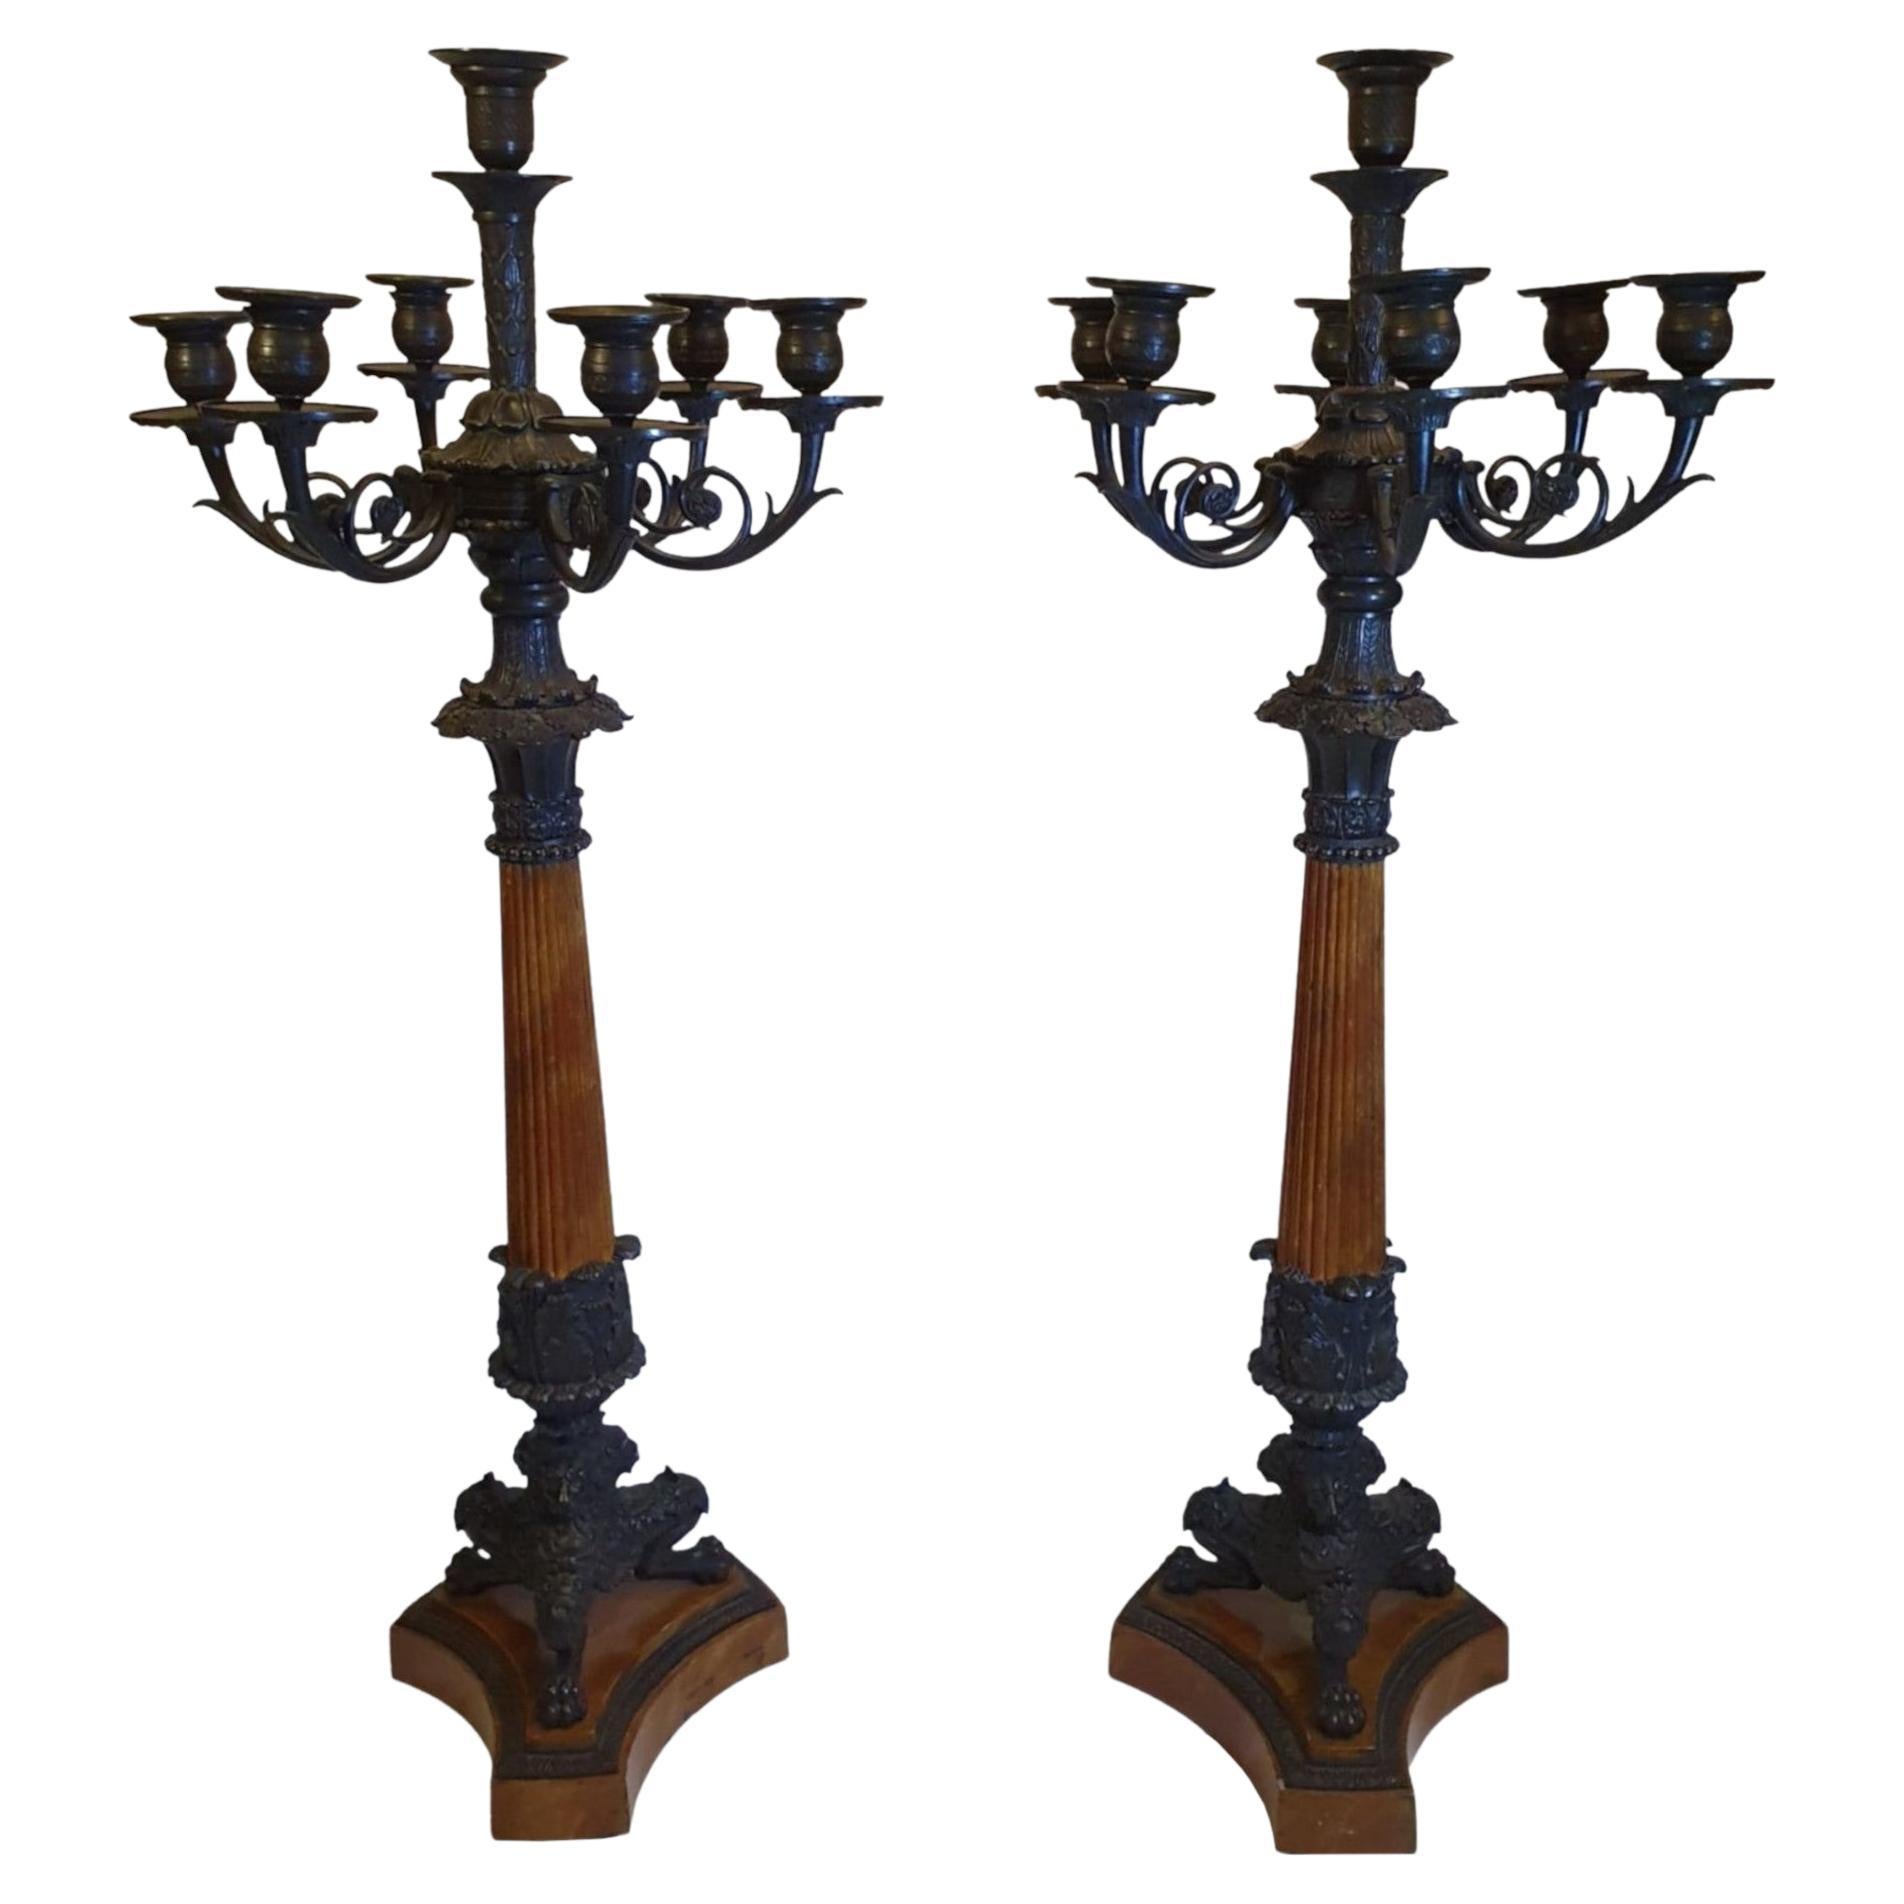 Rare and Fine Pair of 19th Century Bronze Candelabra in the Empire Style